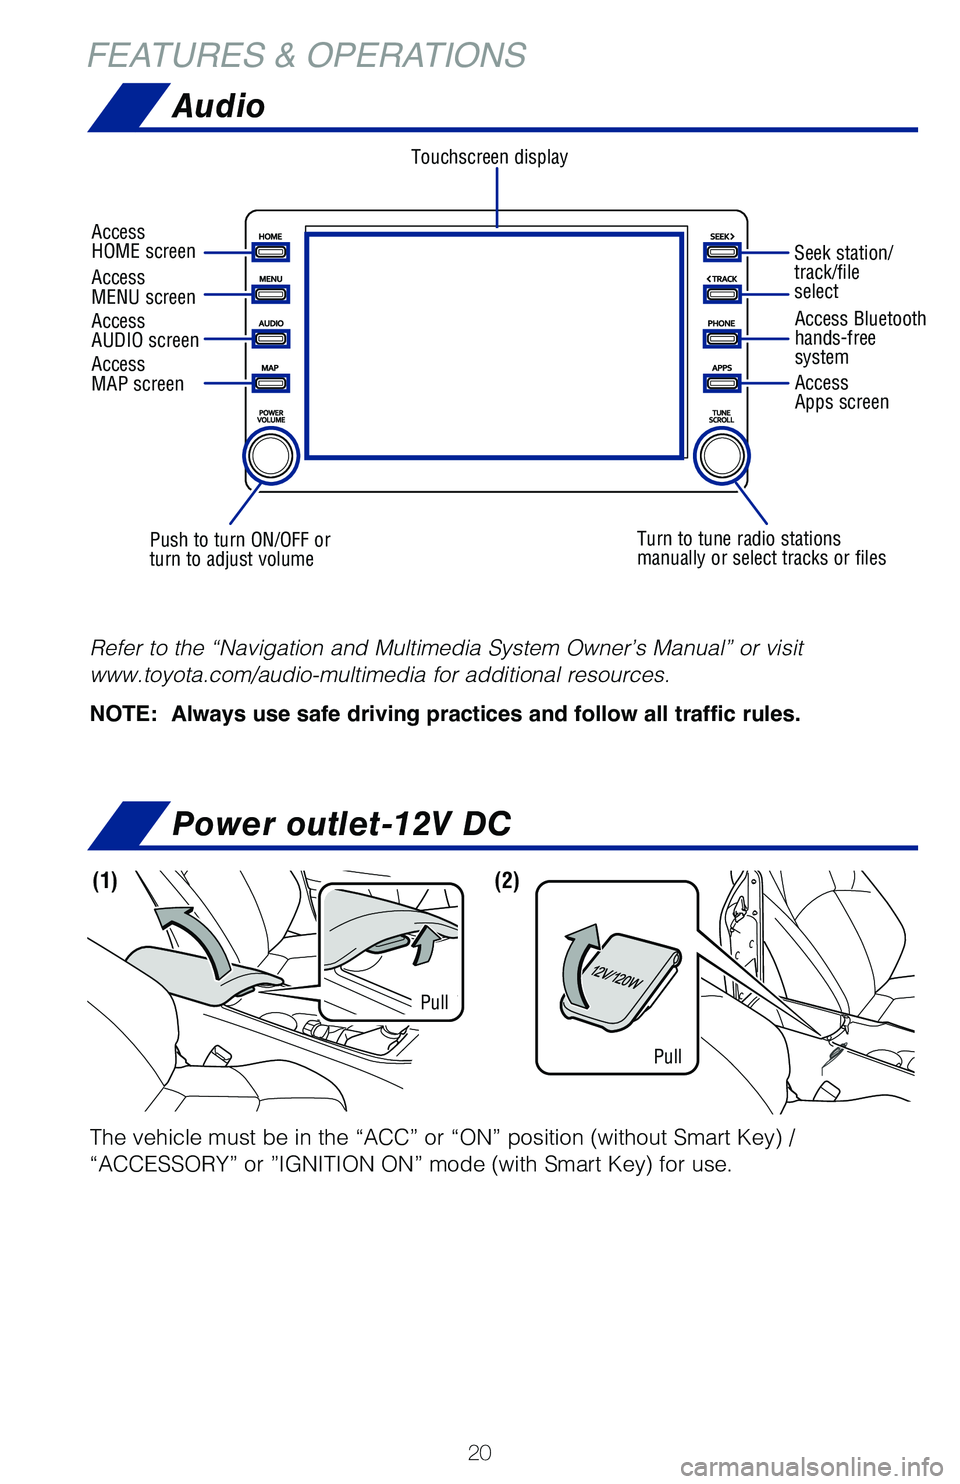 TOYOTA C-HR 2021  Owners Manual (in English) 20
FEATURES & OPERATIONS
The vehicle must be in the “ACC” or “ON” position (without Smart Key) / 
“ACCESSORY” or ”IGNITION ON” mode (with Smart Key) for use.
(1)(2)
Pull
Pull
Power out